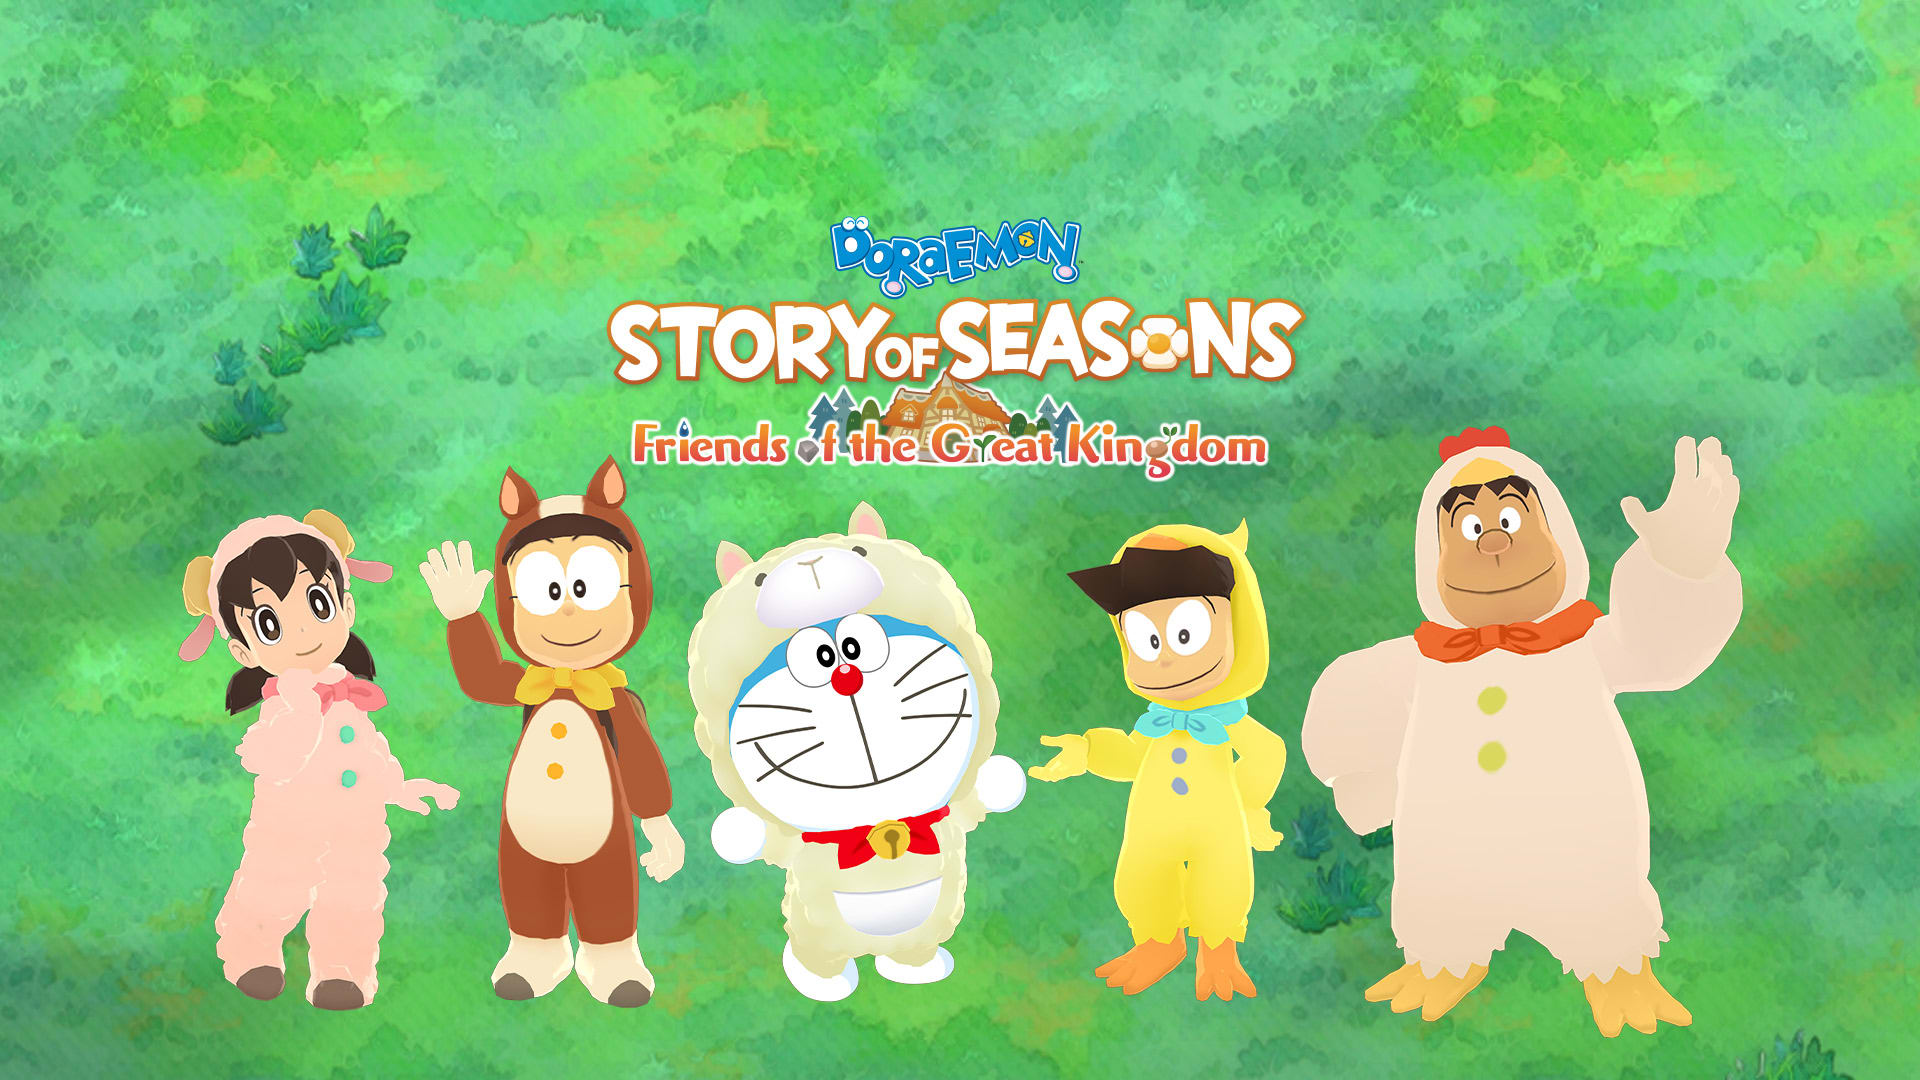 DORAEMON STORY OF SEASONS: FGK - Together with Animals